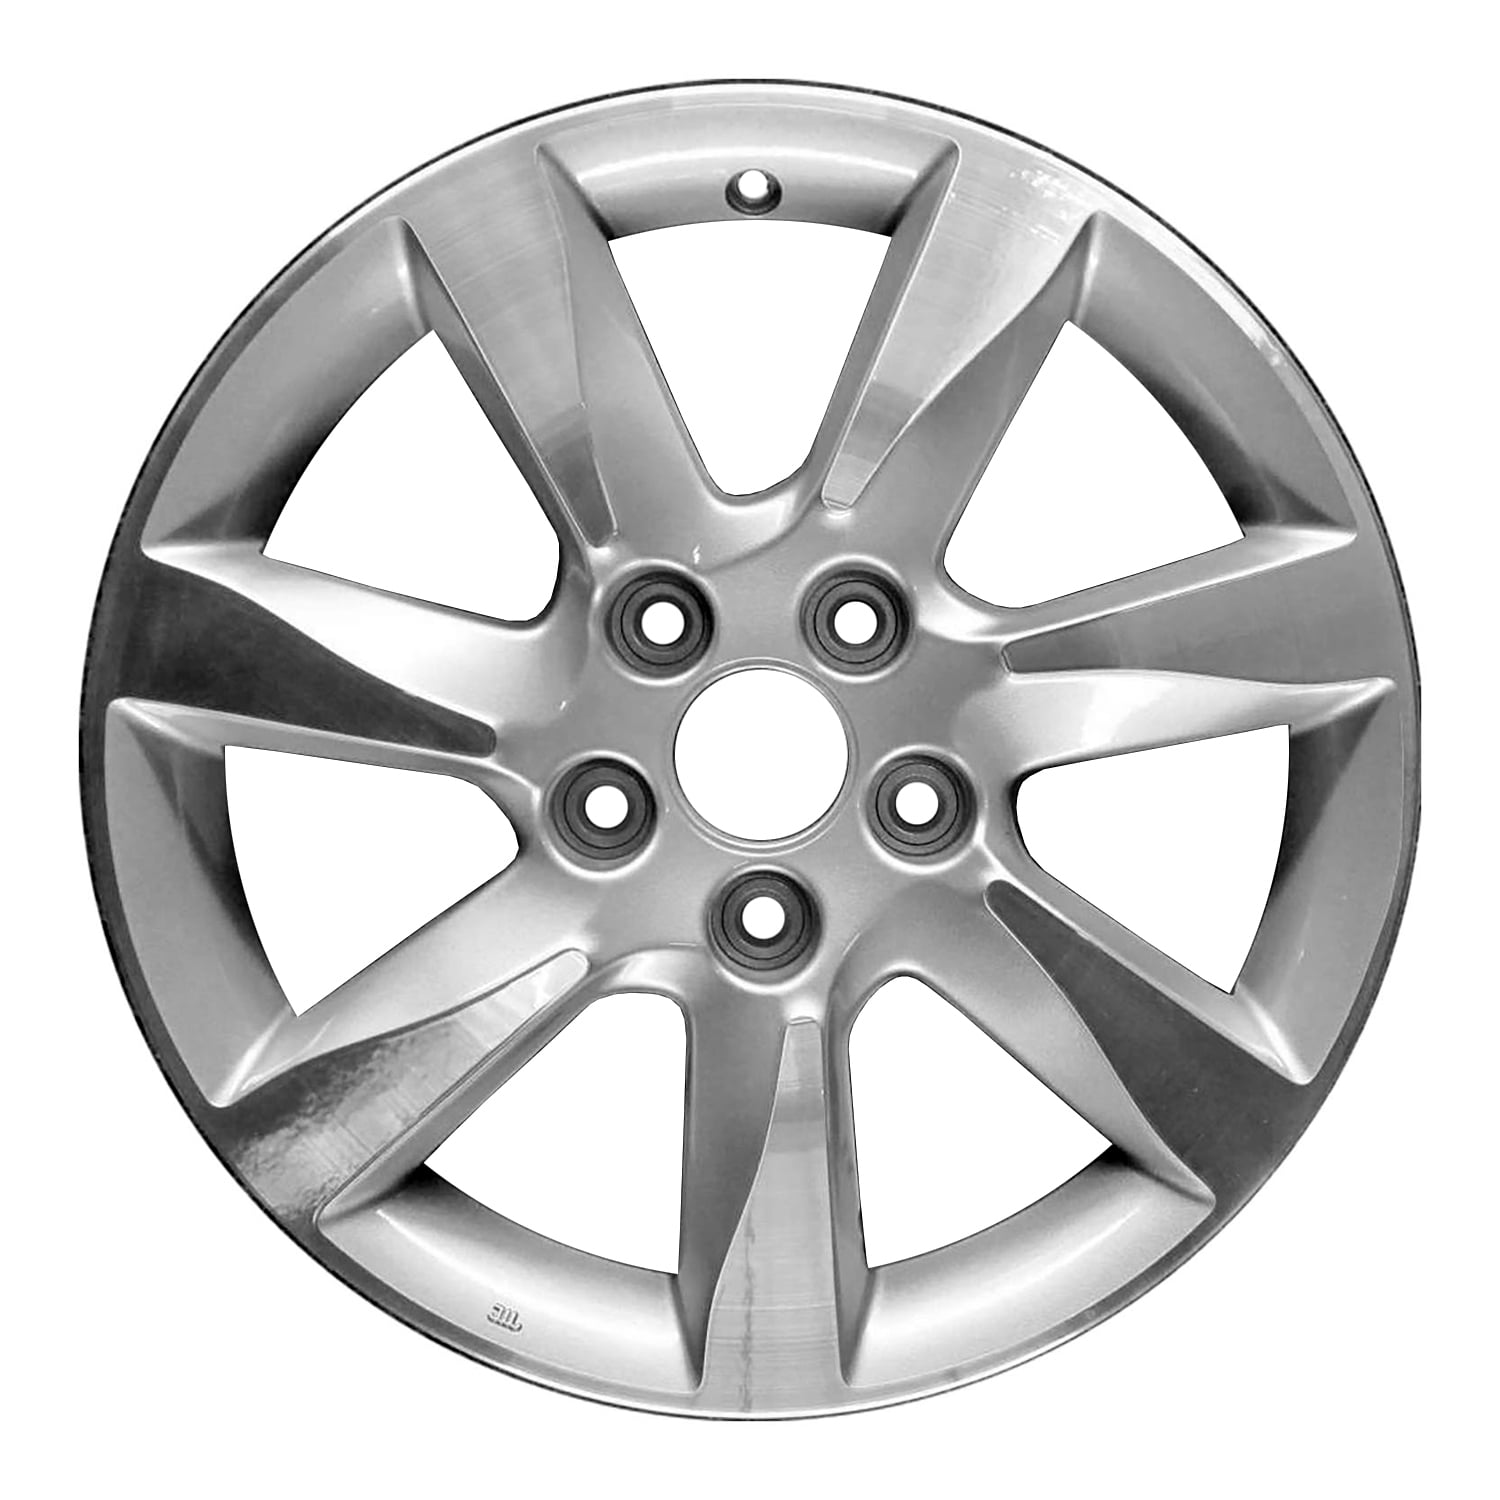 1500 Replacement 5 Spokes Sparkle Silver Factory Alloy Wheel Fits Dodge Ram